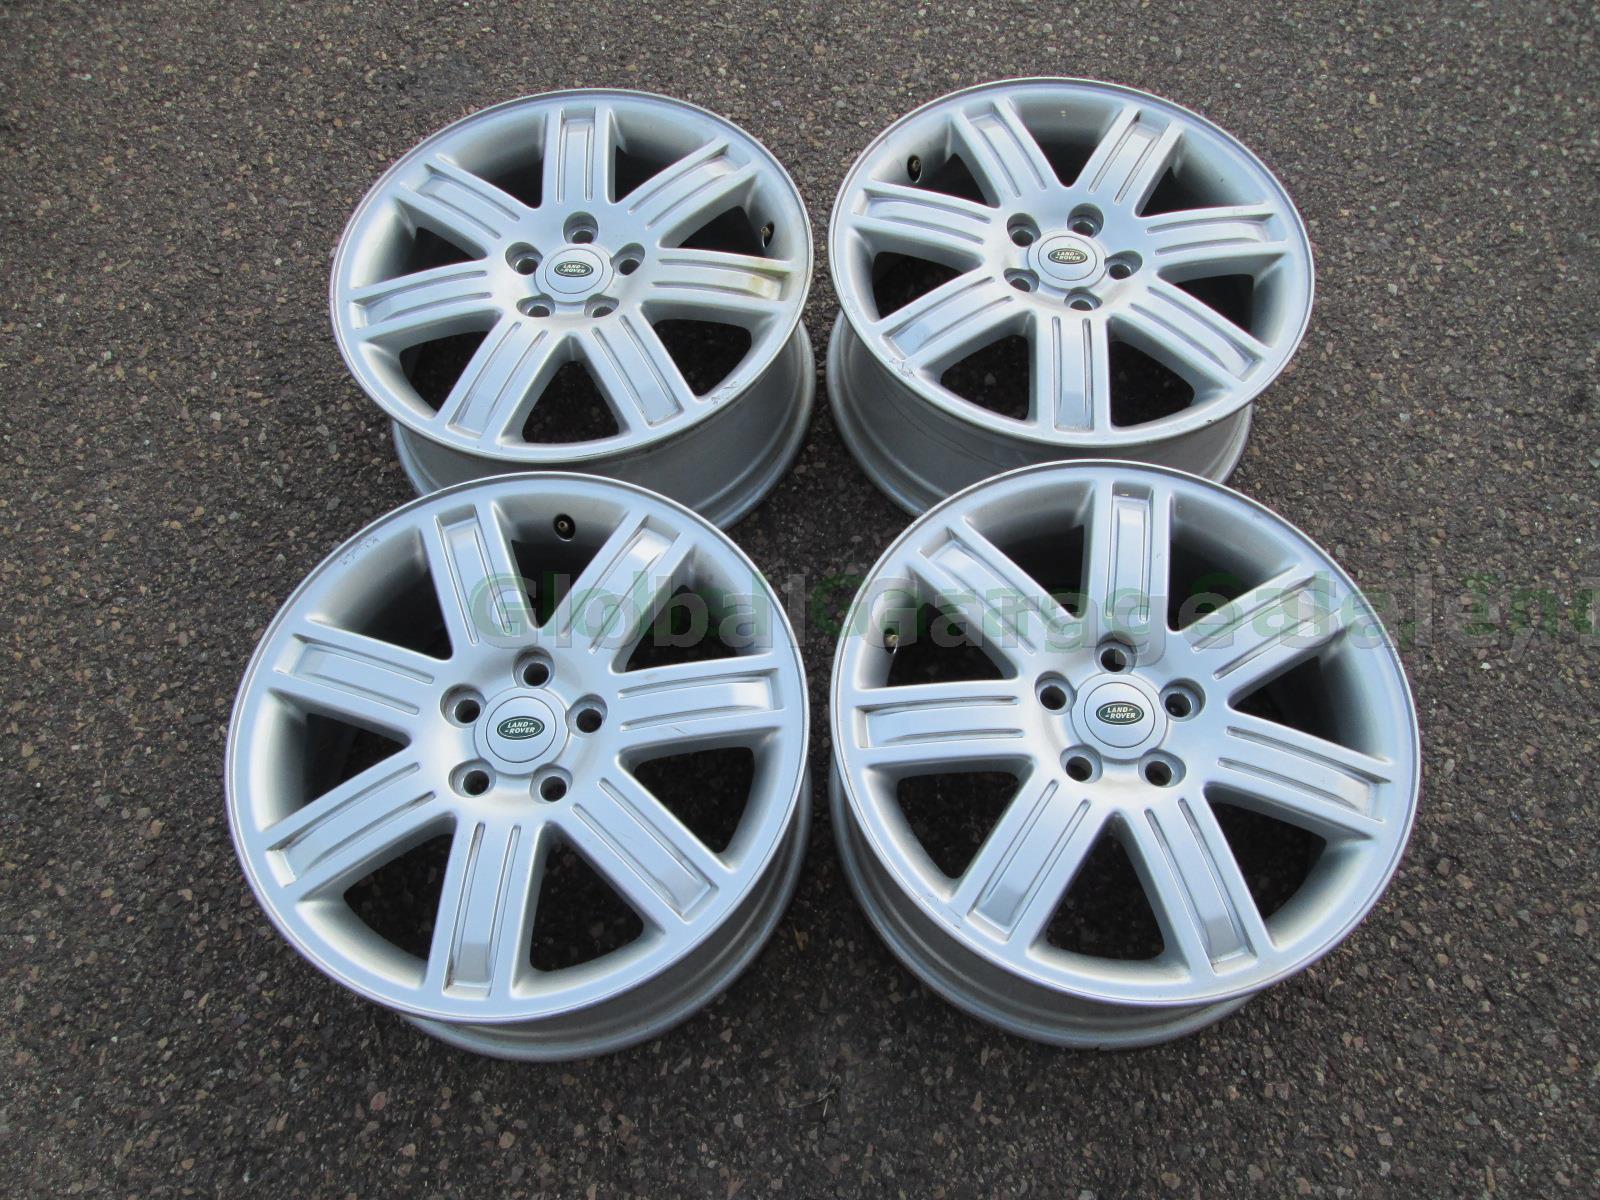 4 Range Rover OEM Stock Factory 19" Inch Rims Wheels 2006 May Fit Up To 2009 NR!